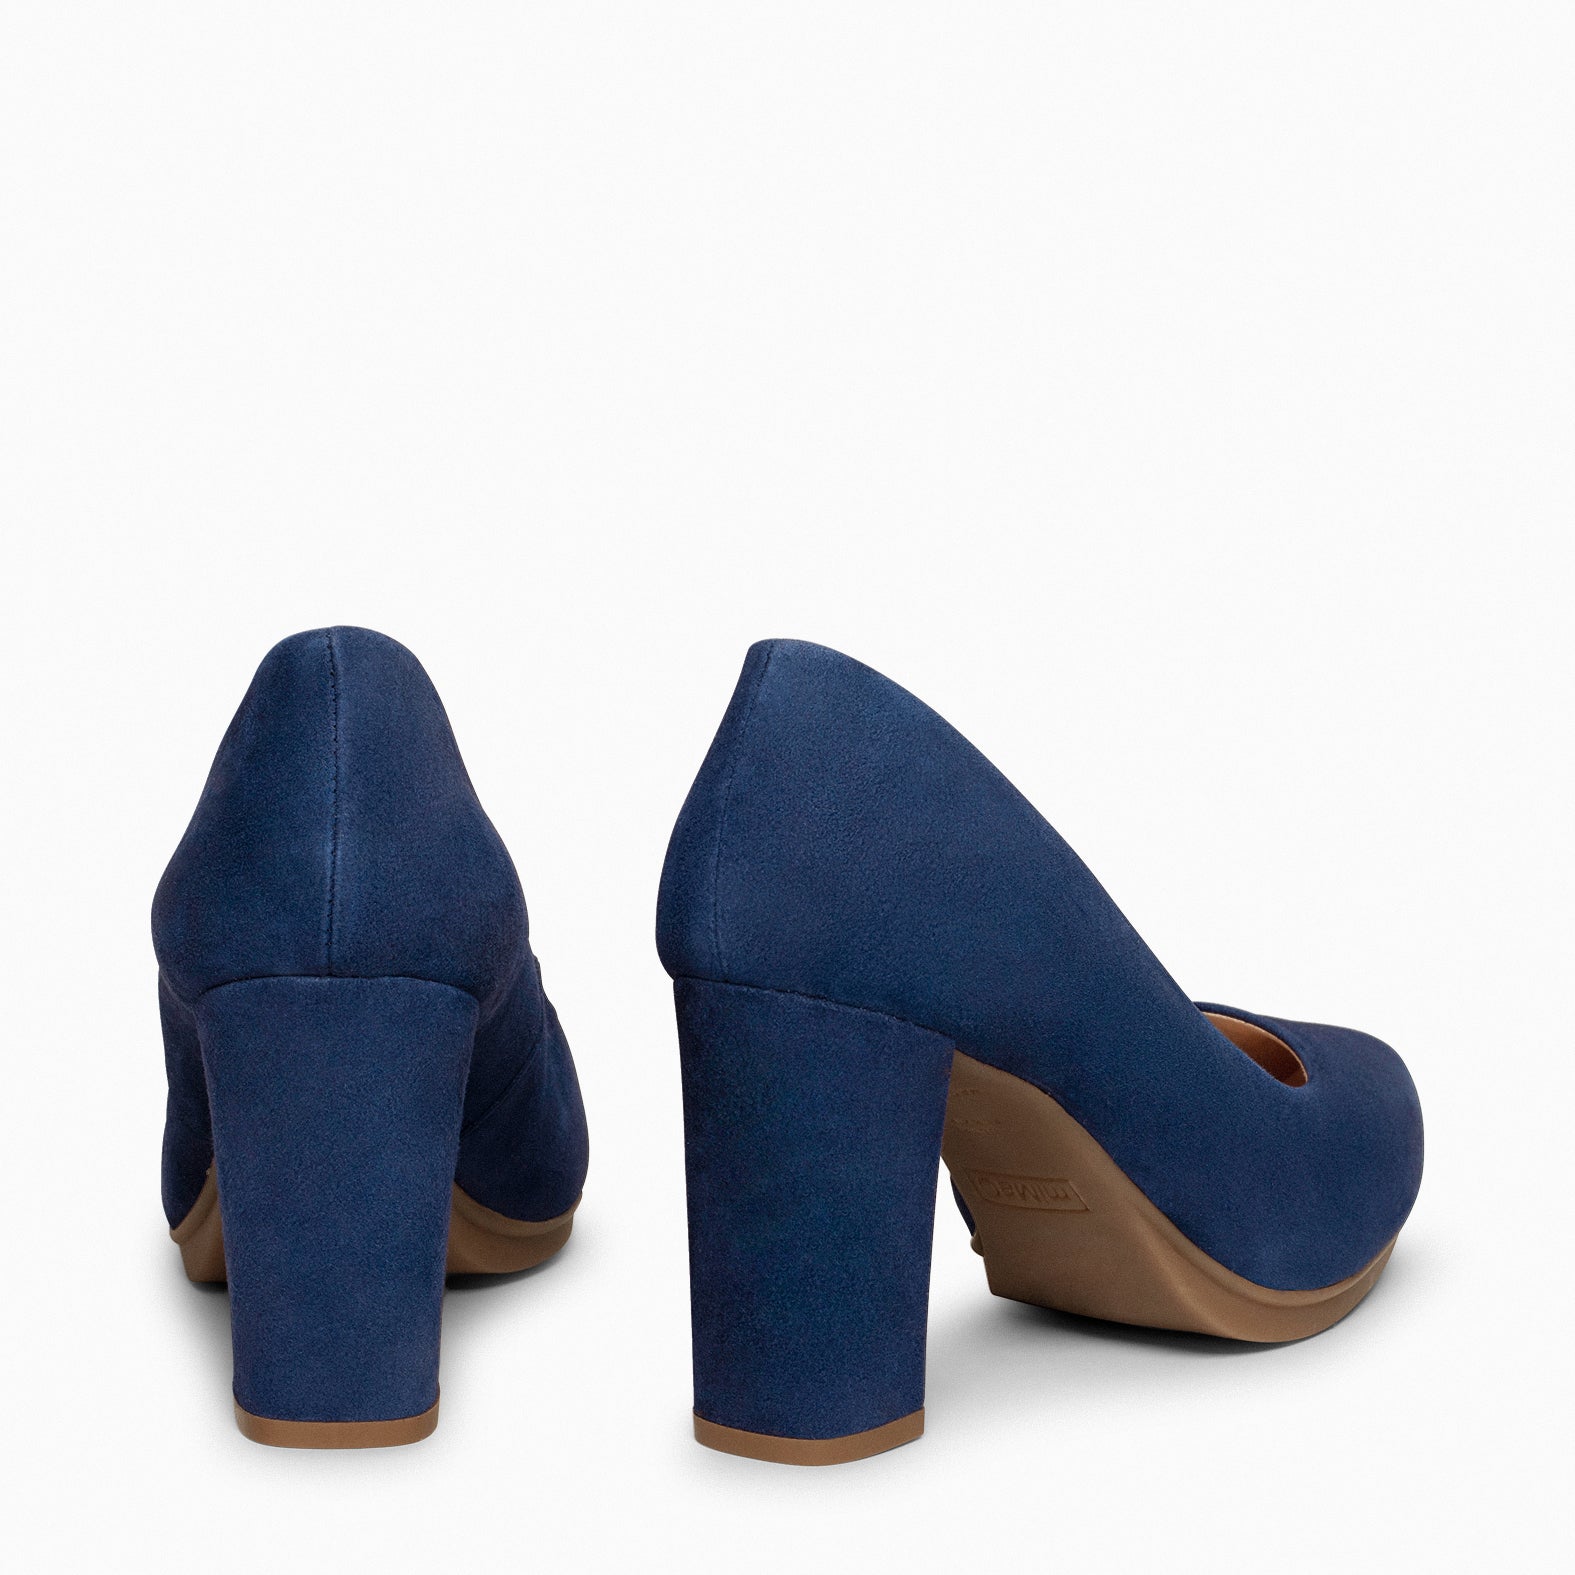 URBAN – NAVY Suede high-heeled shoes 